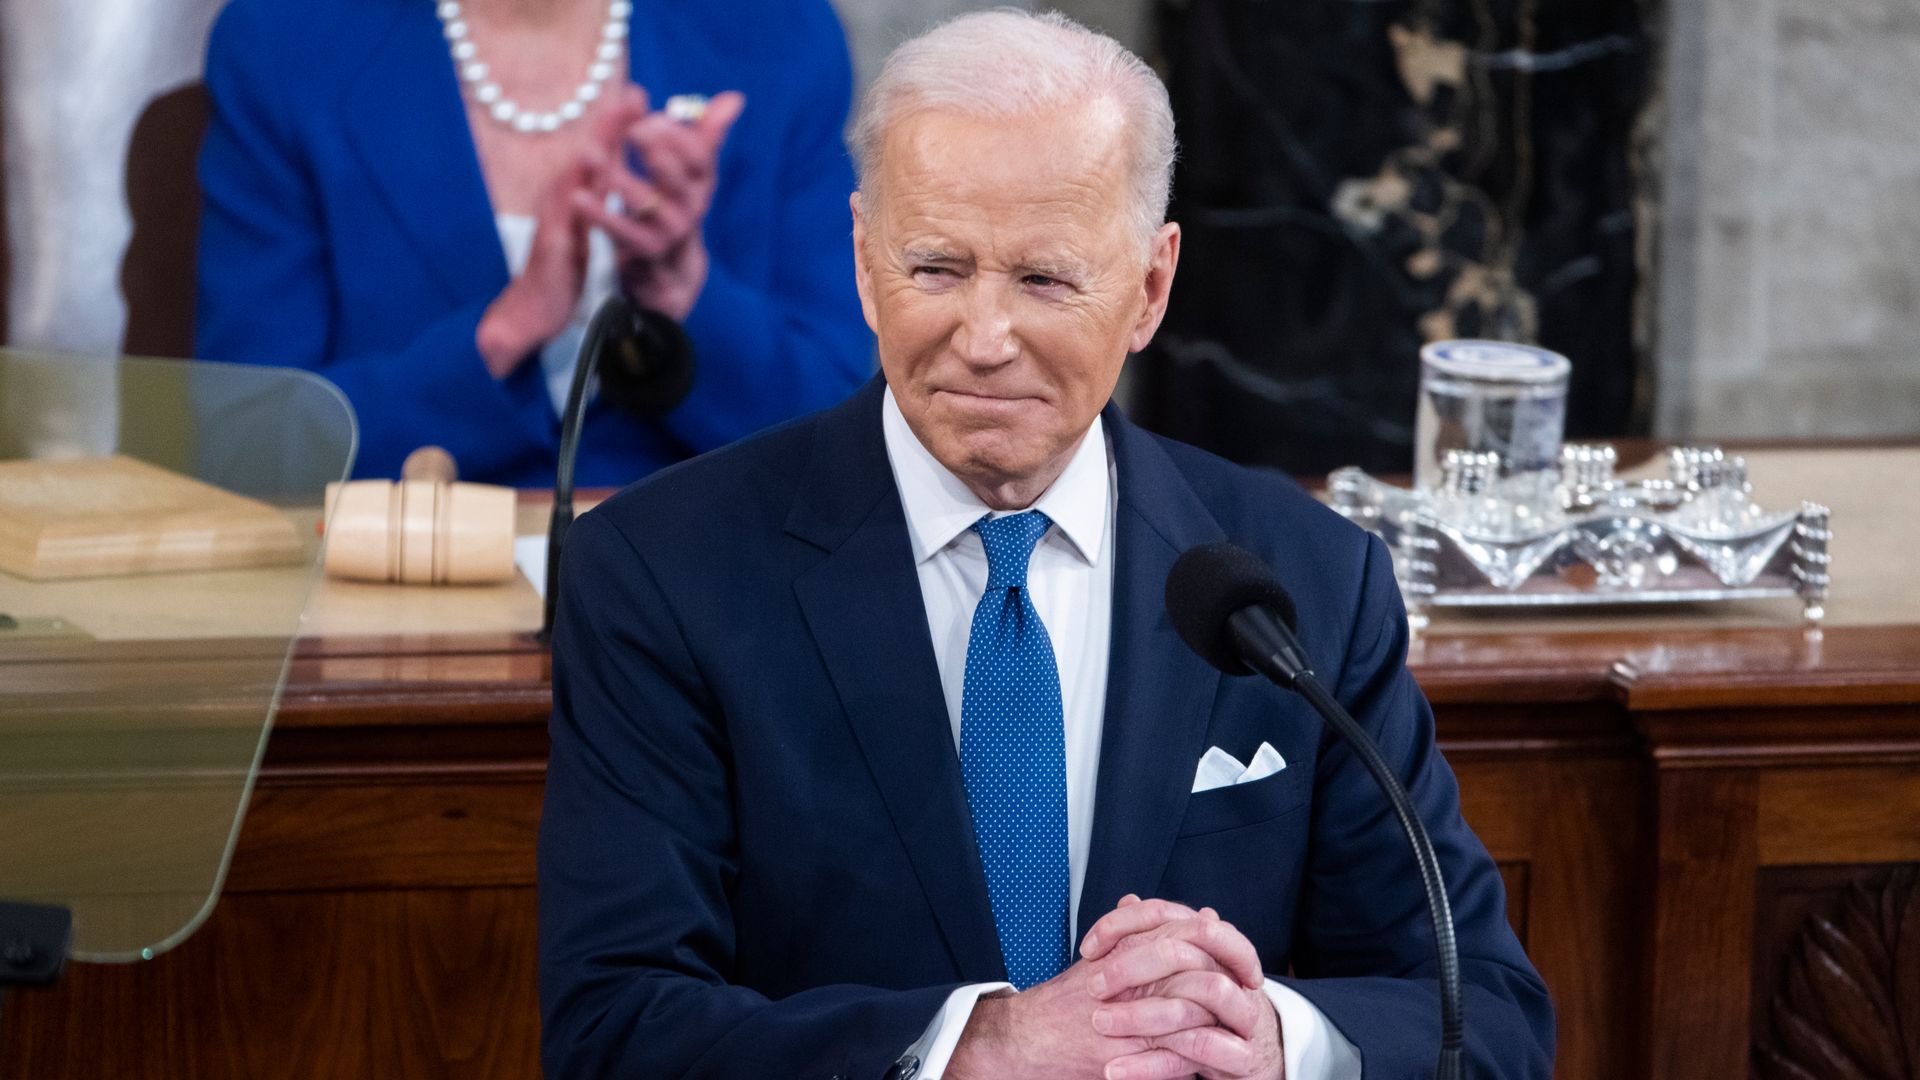 U.S. President Joe Biden during a State of the Union address at the U.S. Capitol in Washington, D.C., on Tuesday, March 1, 2022.